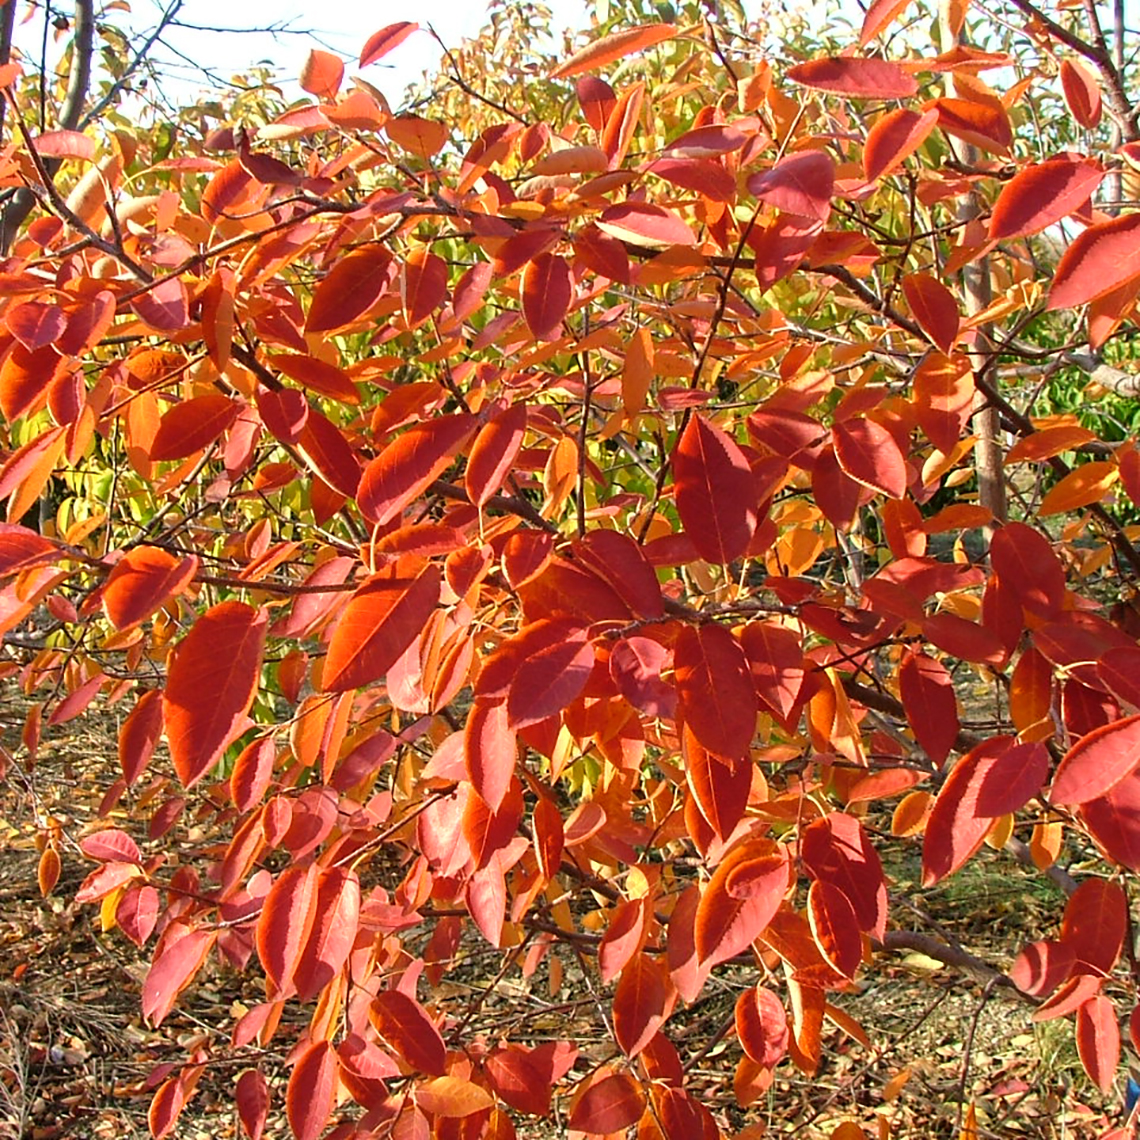 Spring Glory serviceberry is a small native tree with glowing orange fall color.